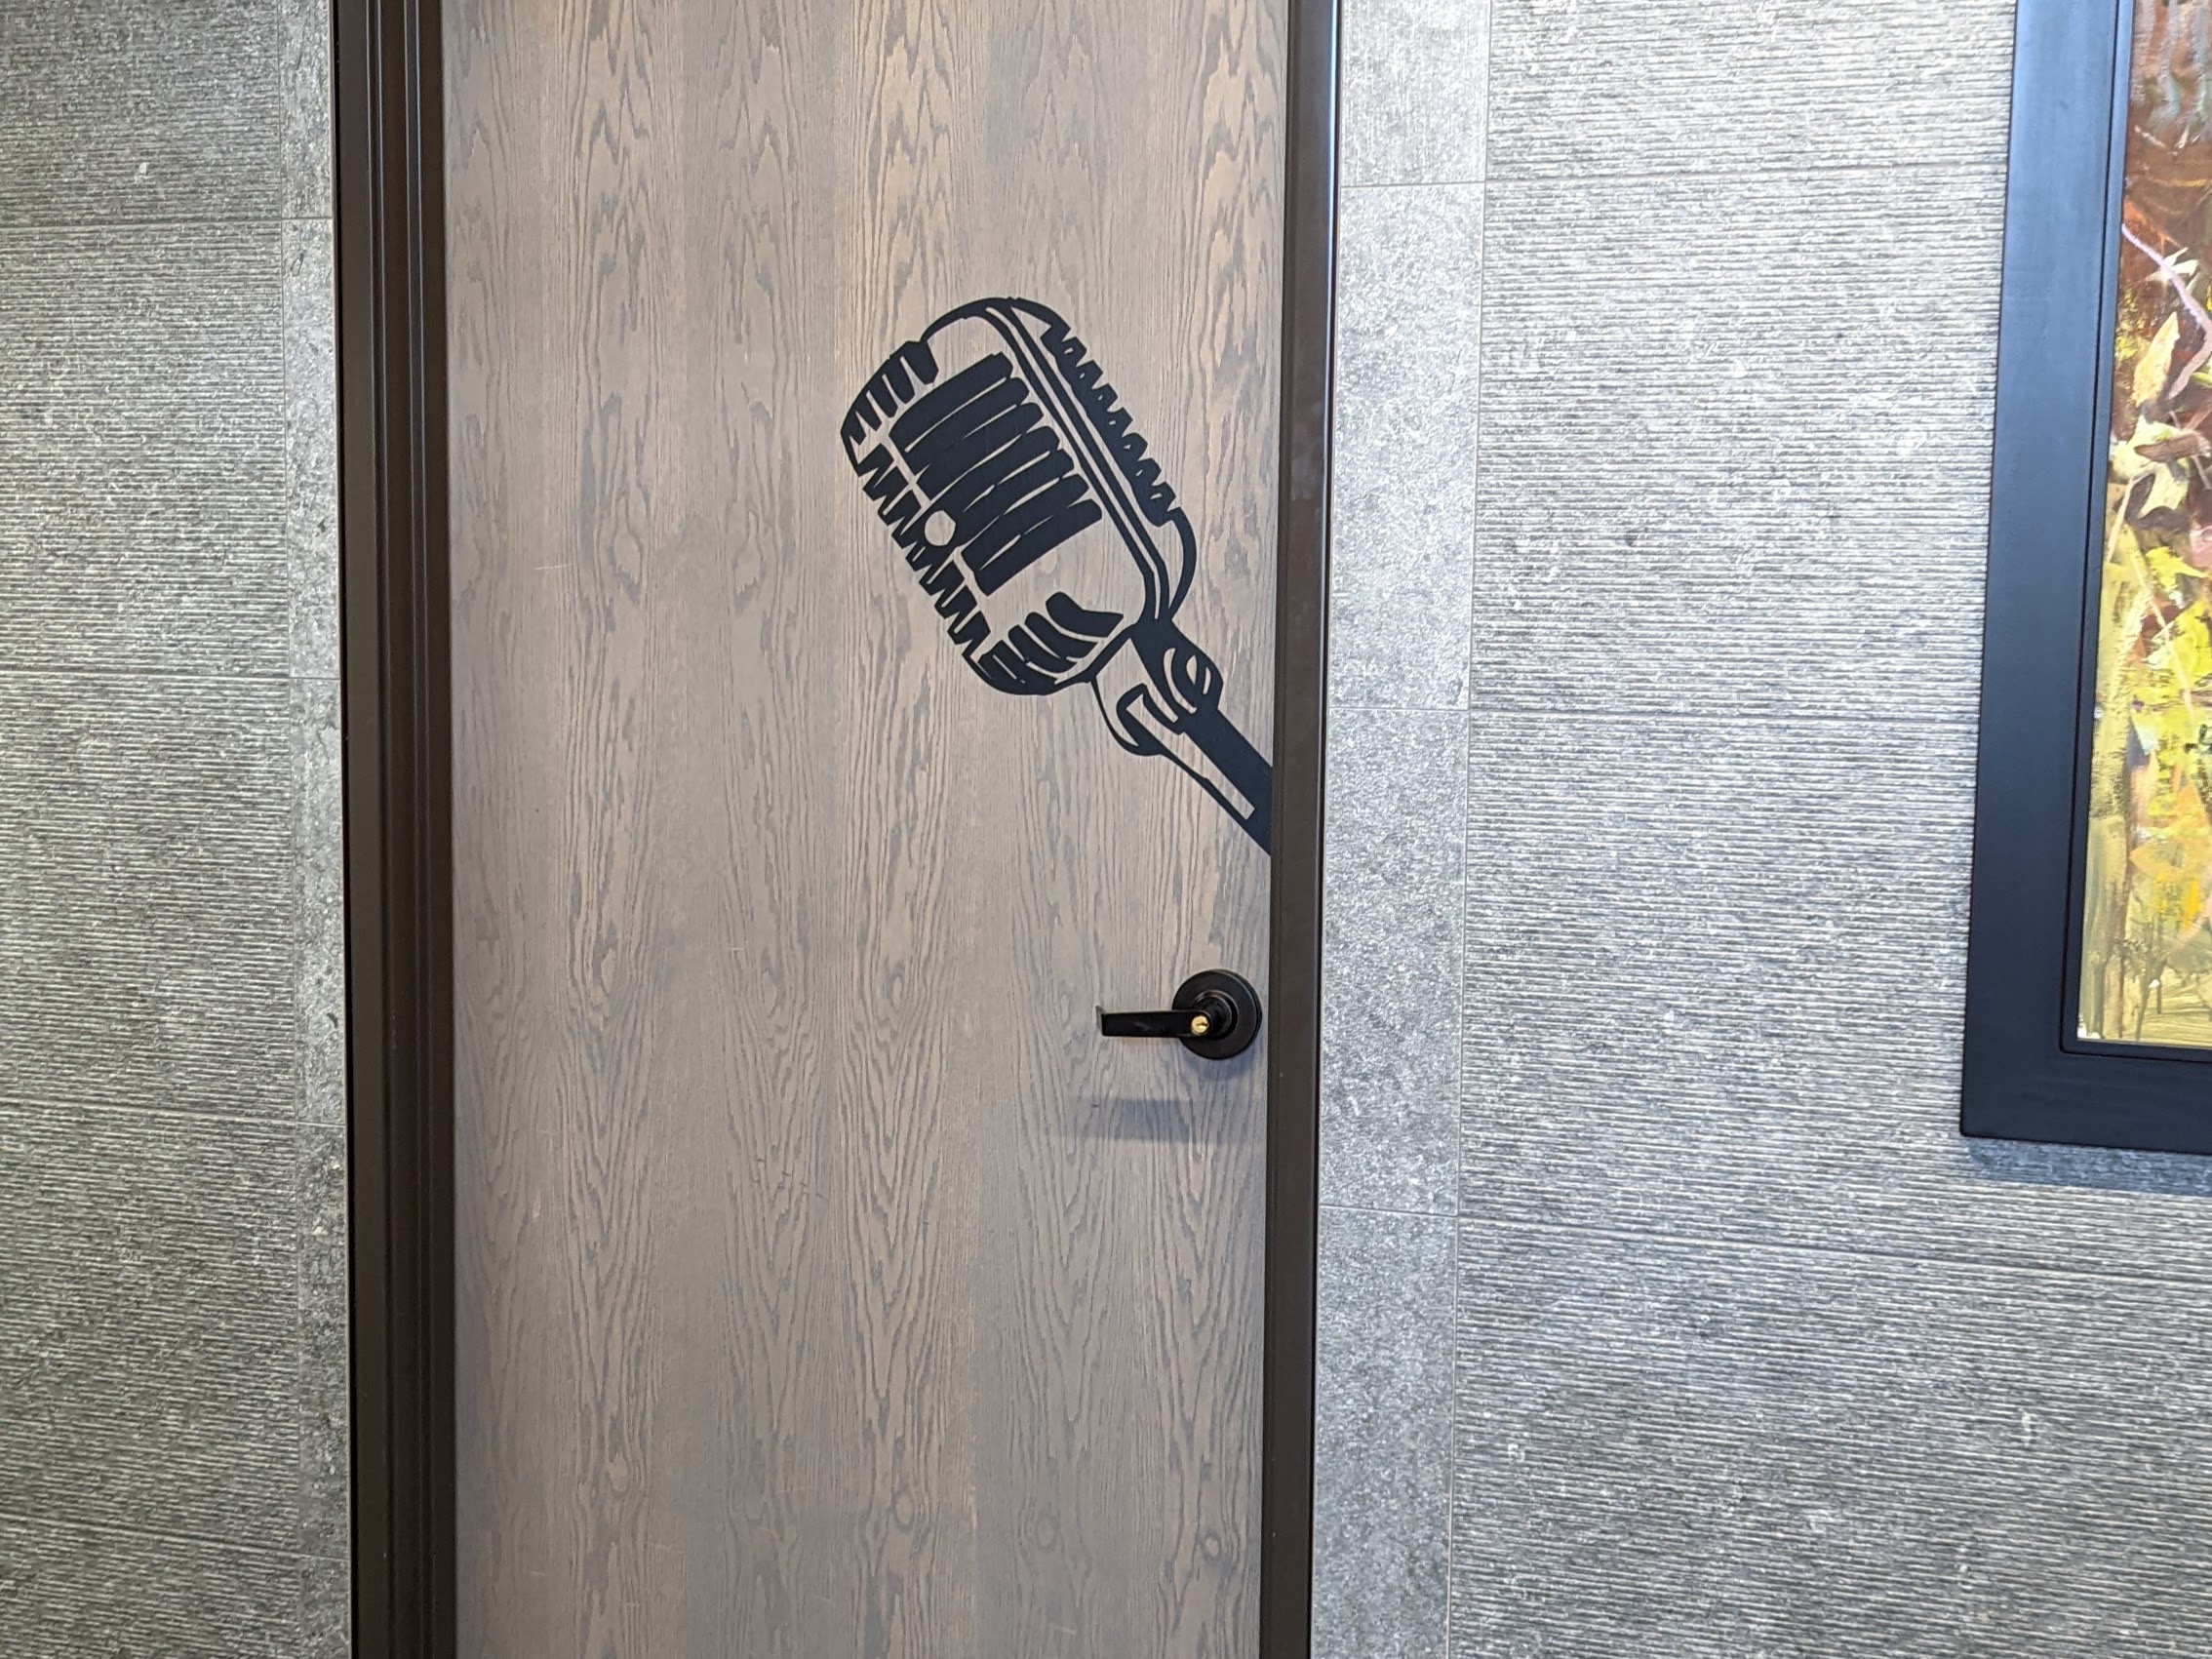 Podcasting Studio Door in Denver with a Microphone Decal